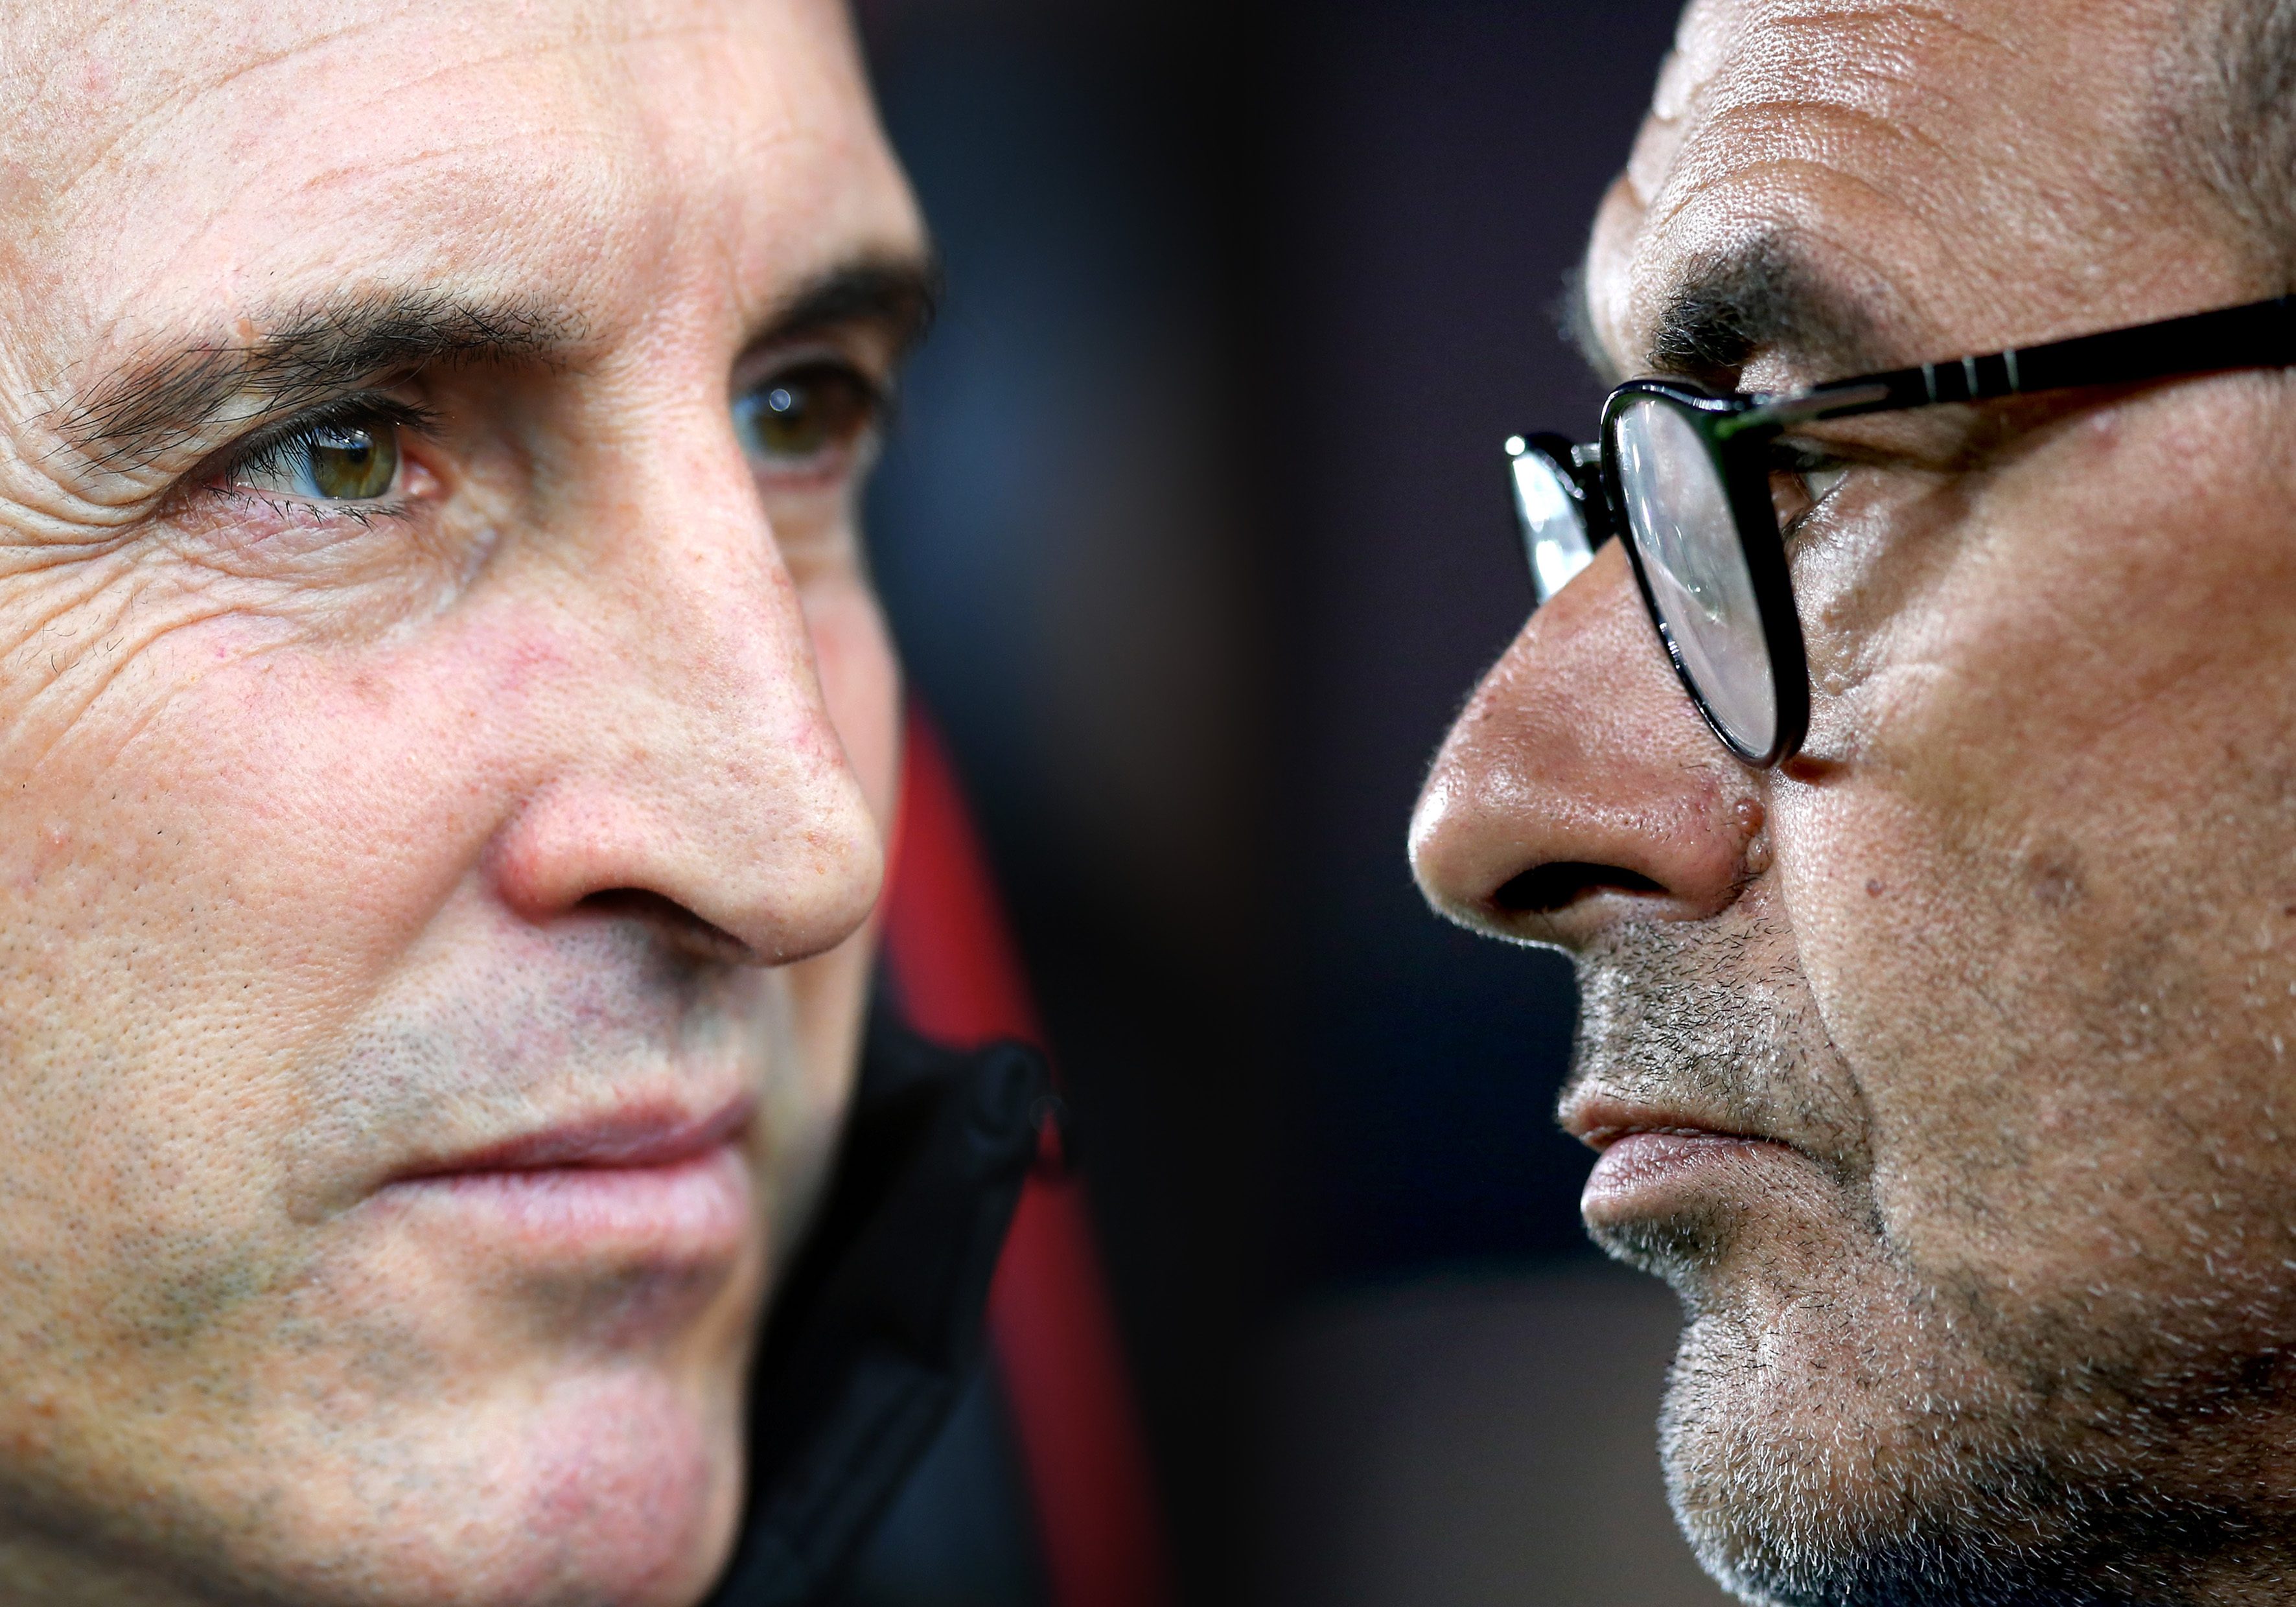 FILE PHOTO (EDITORS NOTE: COMPOSITE OF IMAGES - Image numbers 1065112934,1040951906 - GRADIENT ADDED) In this composite image a comparison has been made between  Unai Emery, Manager of Arsenal (L) and Maurizio Sarri, Manager of Chelsea.  Arsenal FC and Chelsea FC meet in a Premier League fixture on January 19, 2019 at the Emirates Stadium in London.   ***LEFT IMAGE*** BOURNEMOUTH, ENGLAND - NOVEMBER 25: Unai Emery, Manager of Arsenal looks on prior to the Premier League match between AFC Bournemouth and Arsenal FC at Vitality Stadium on November 25, 2018 in Bournemouth, United Kingdom. (Photo by Dan Mullan/Getty Images) ***RIGHT IMAGE***  LIVERPOOL, ENGLAND - SEPTEMBER 26: Maurizio Sarri, Manager of Chelsea looks on ahead of the Carabao Cup Third Round match between Liverpool and Chelsea at Anfield on September 26, 2018 in Liverpool, England. (Photo by Jan Kruger/Getty Images)